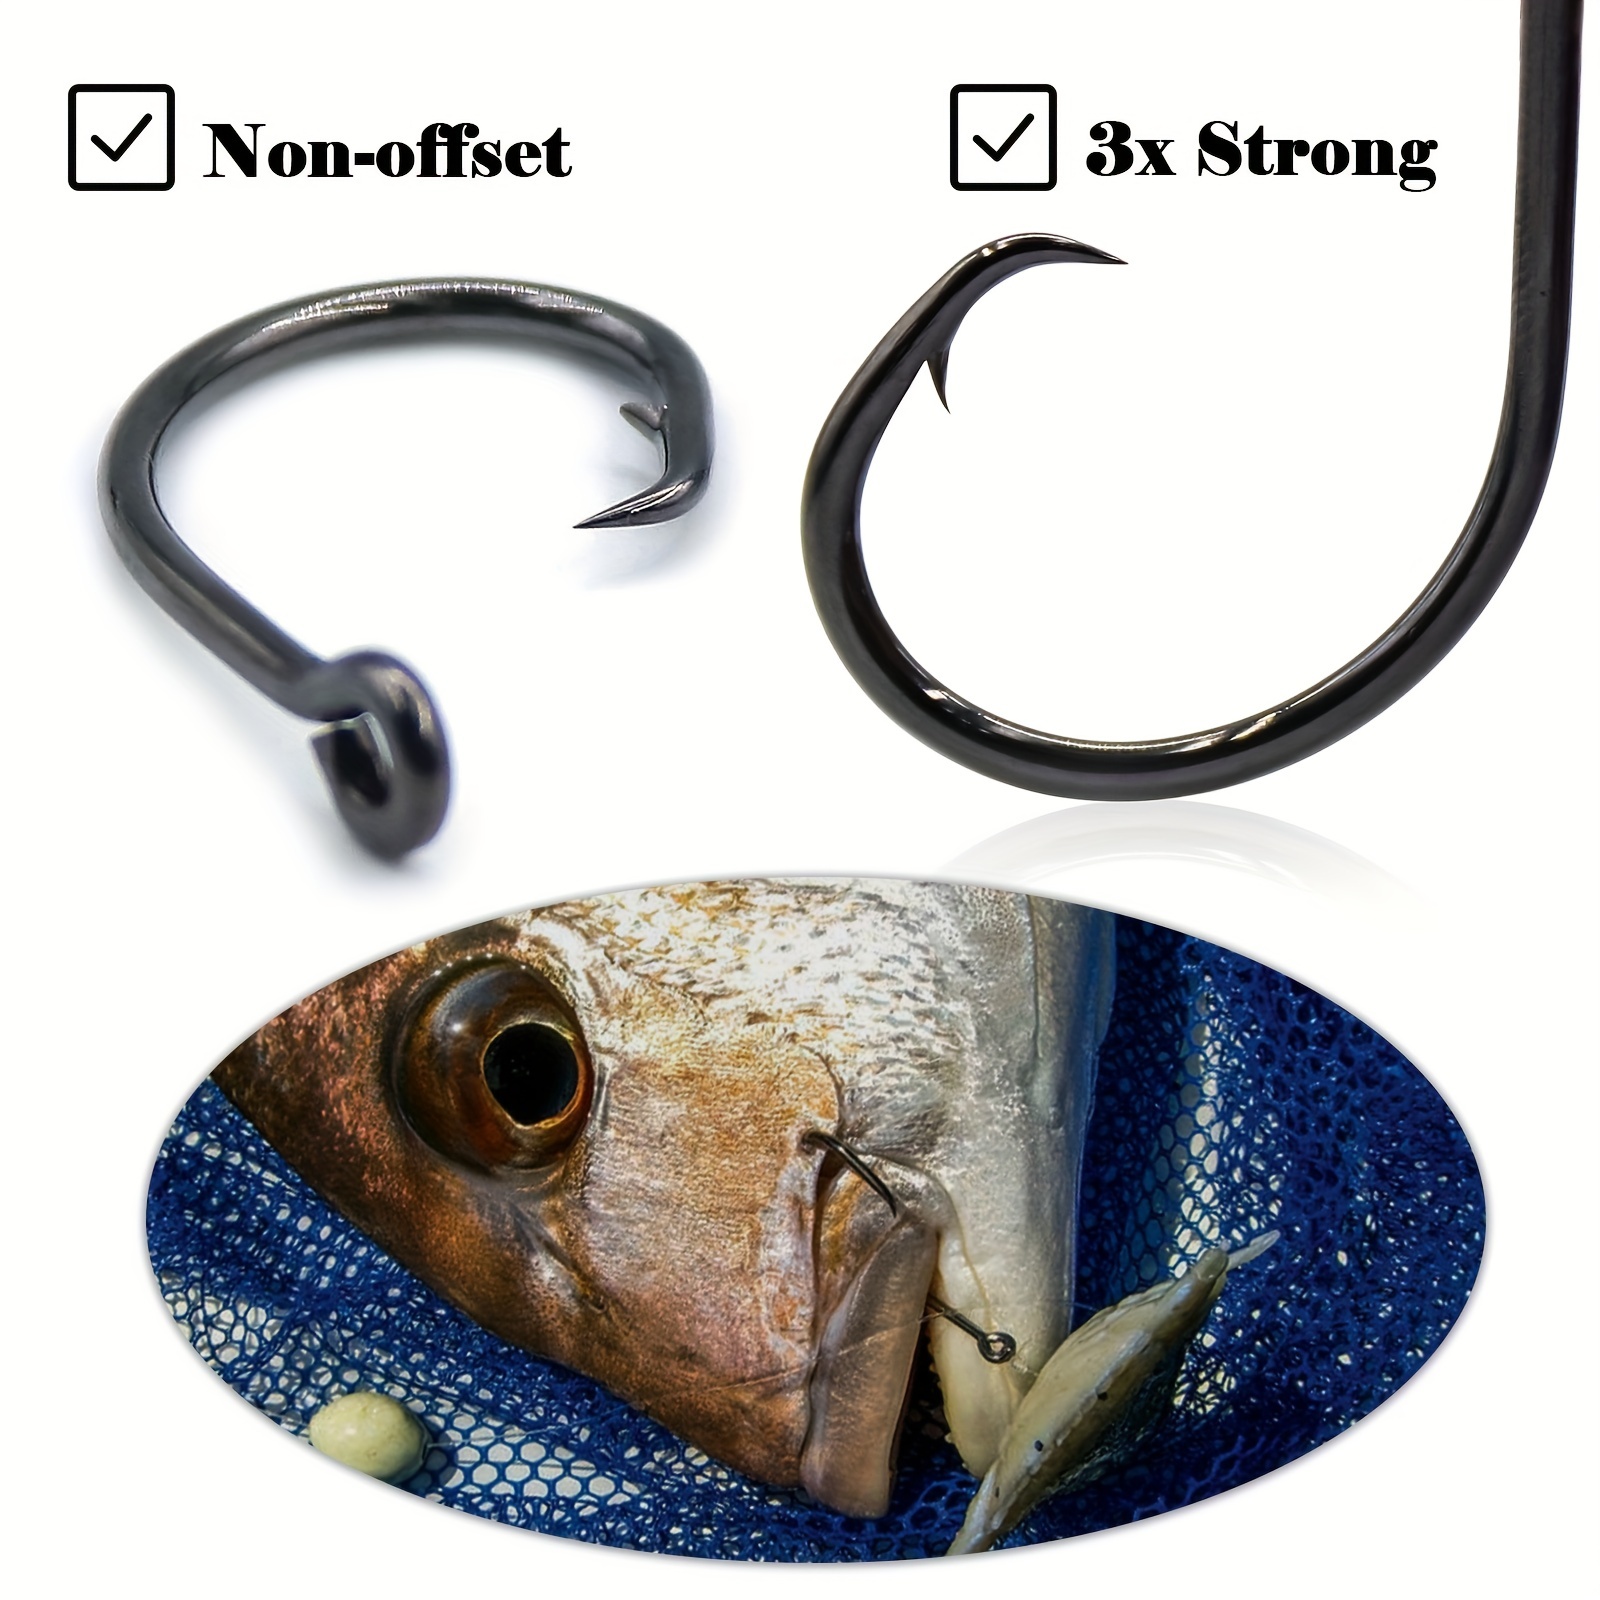 Offset your circle hooks for better hook ups. 